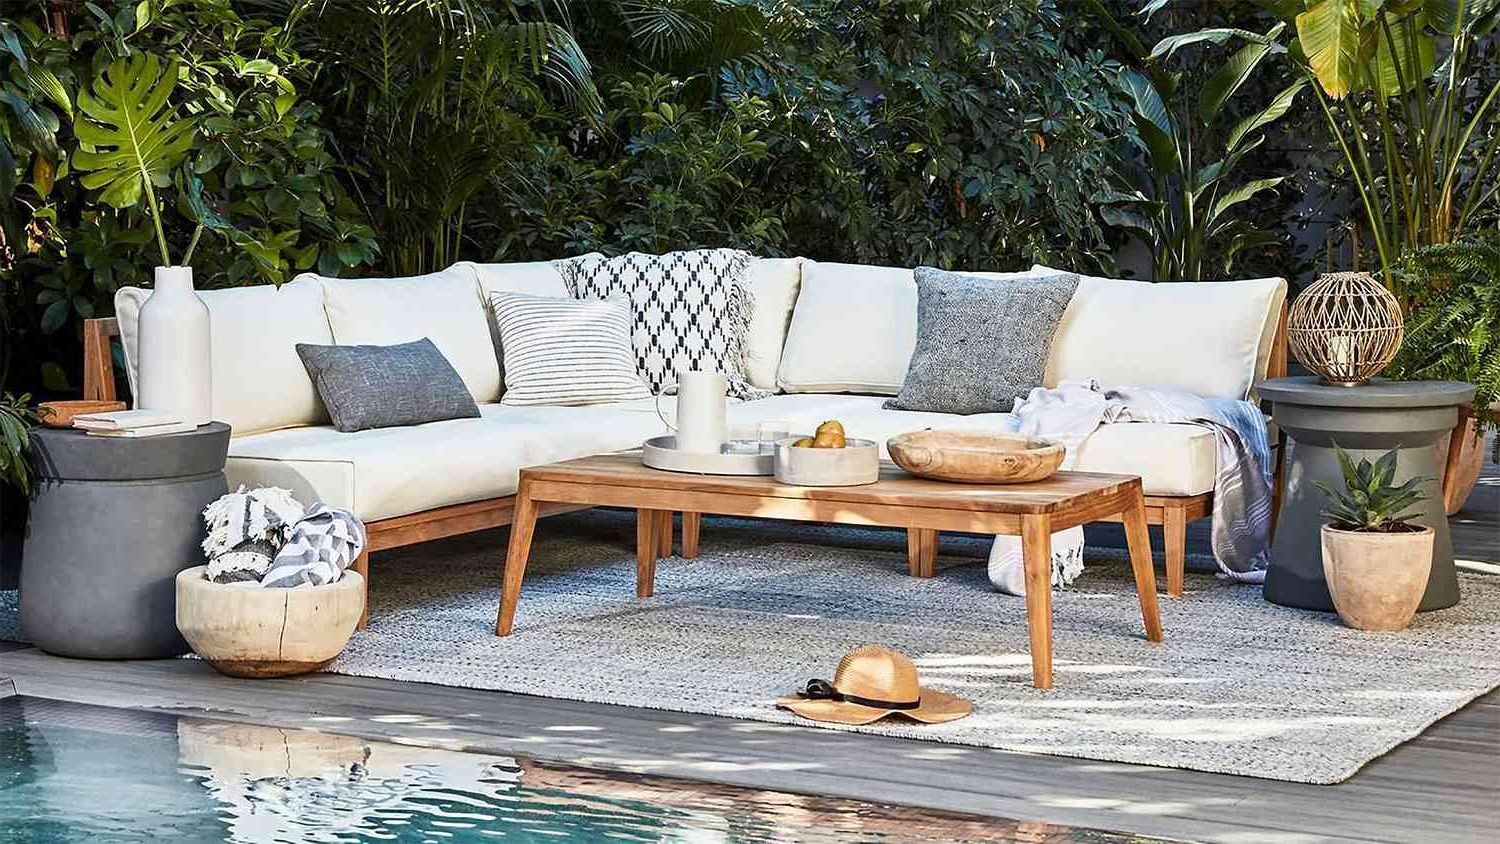 Most Popular Outer's Outdoor Sectional Is More Comfortable Than My Indoor Couch Intended For Outdoor Couch Cushions, Throw Pillows And Slat Coffee Table (Photo 5 of 15)